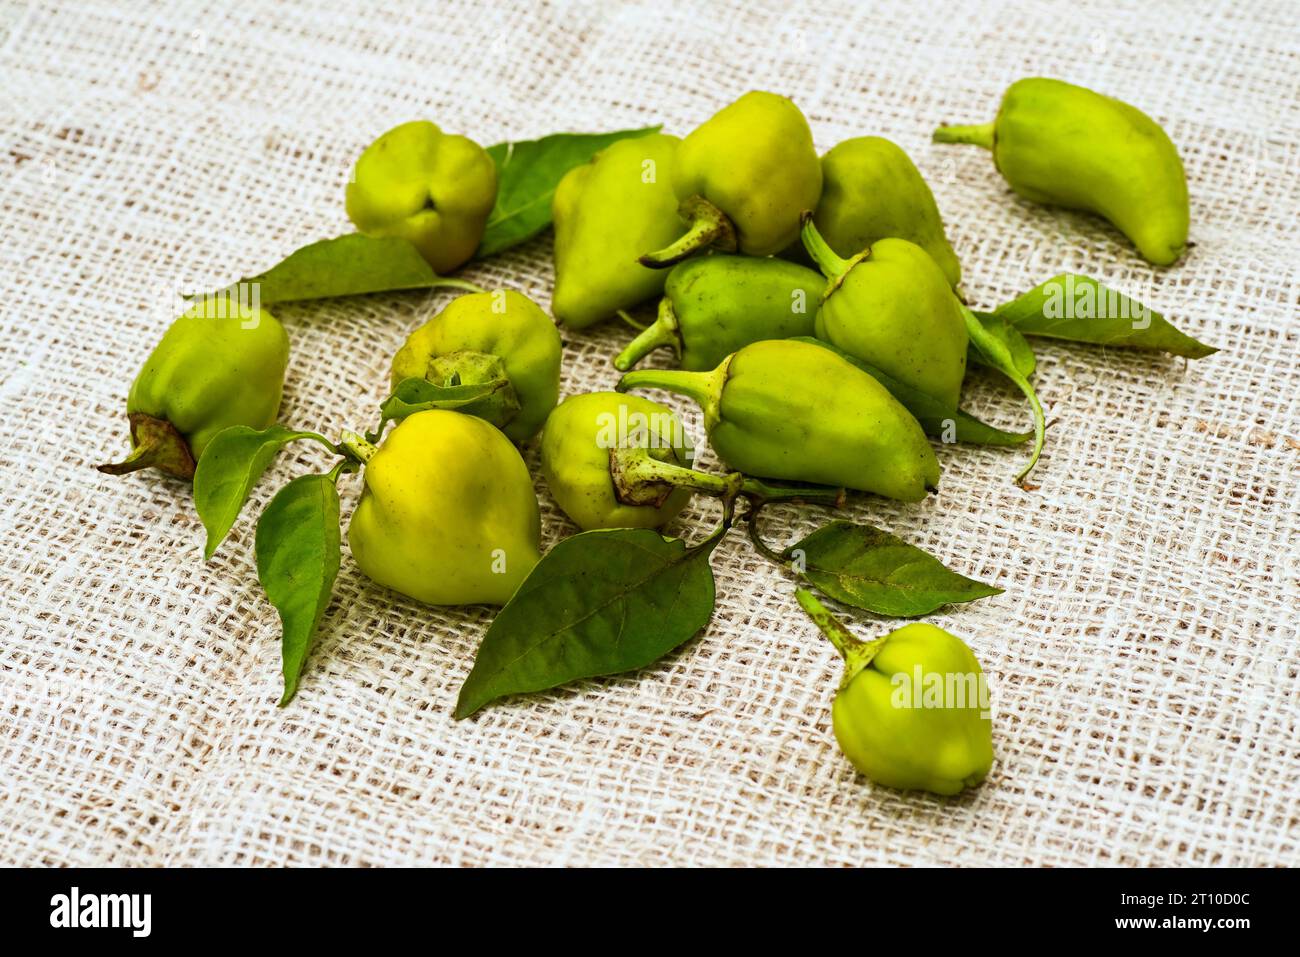 Pile of small green peppers on beige tablecloth. Stock Photo